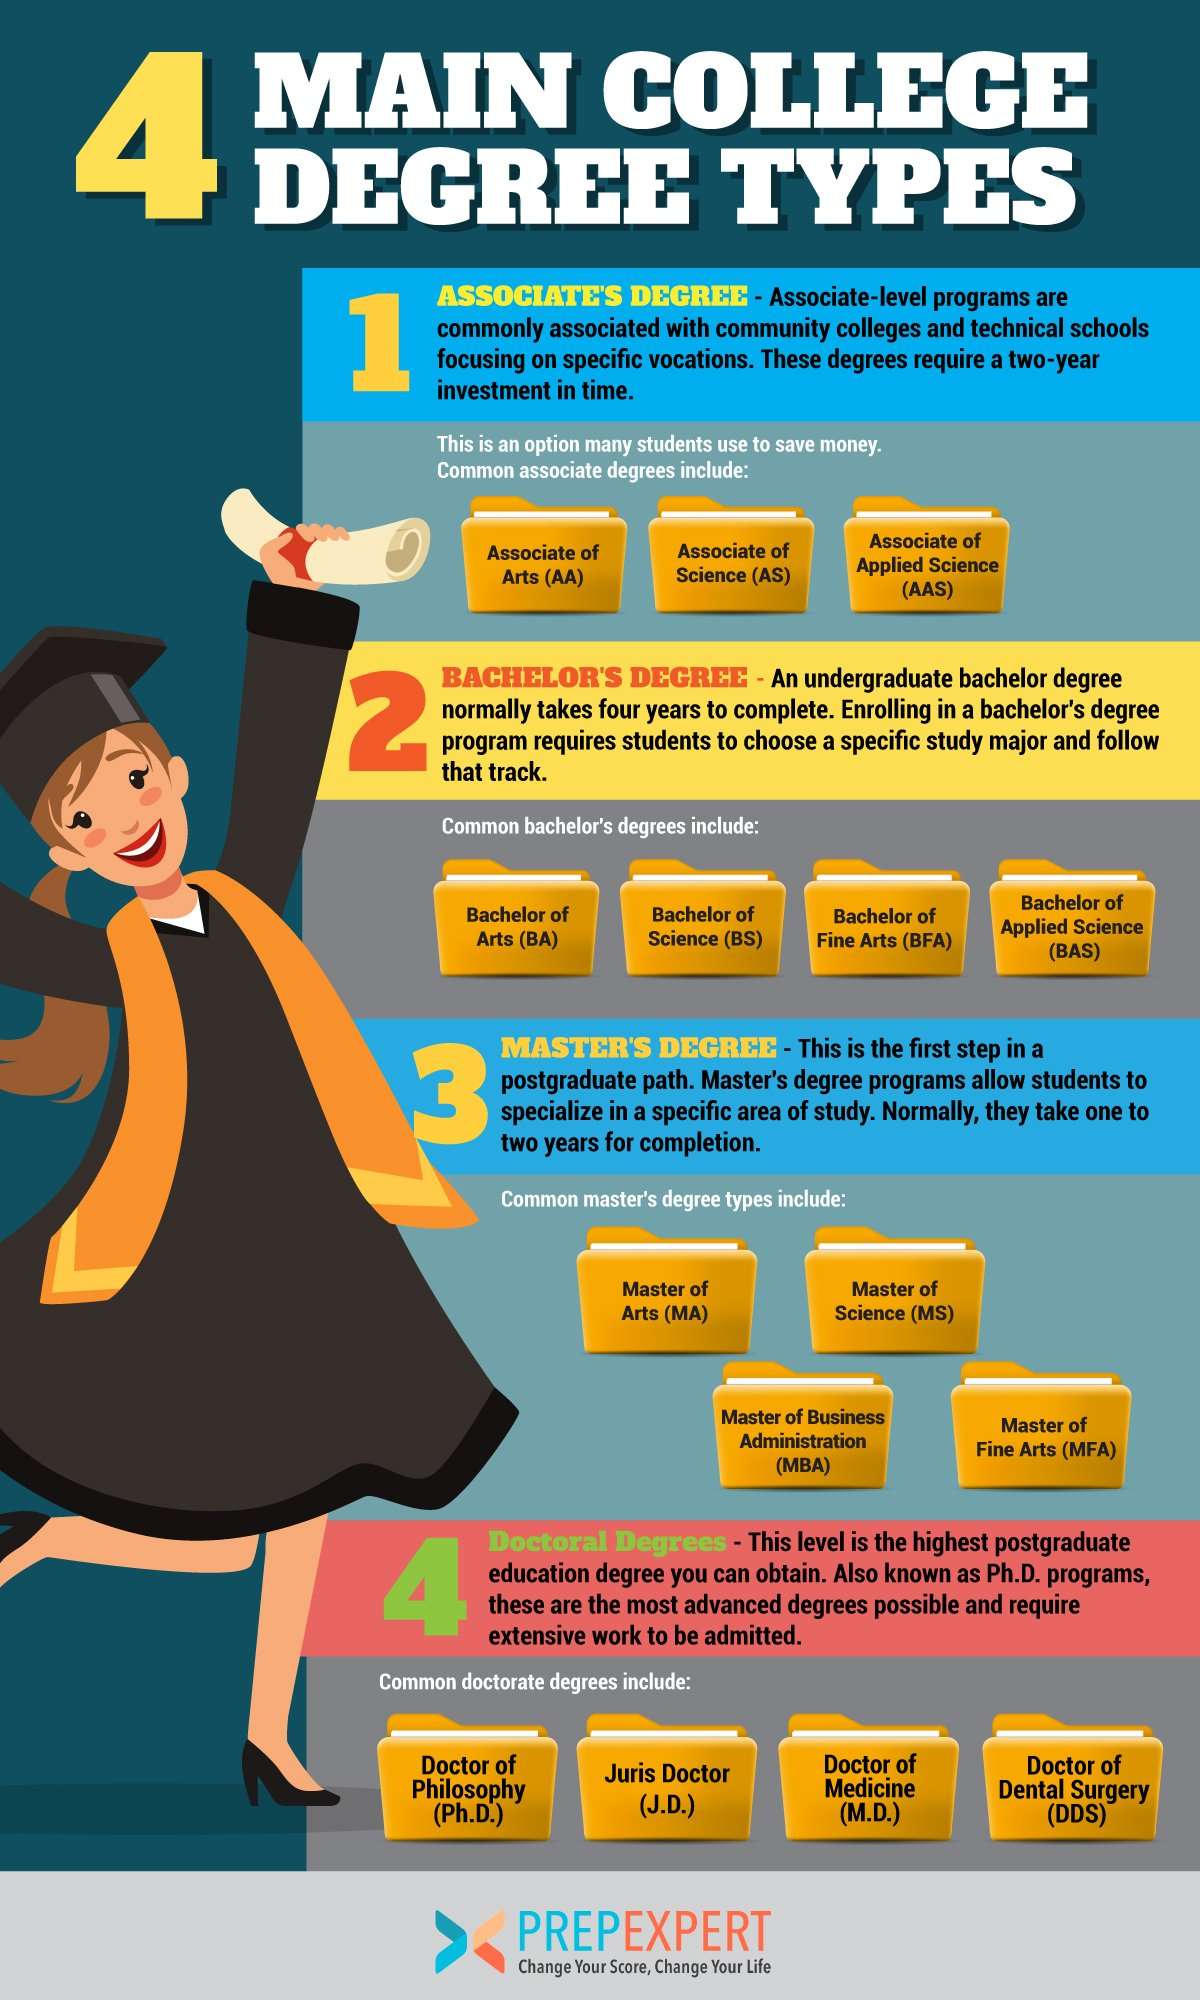 The Four Main College Degree Types